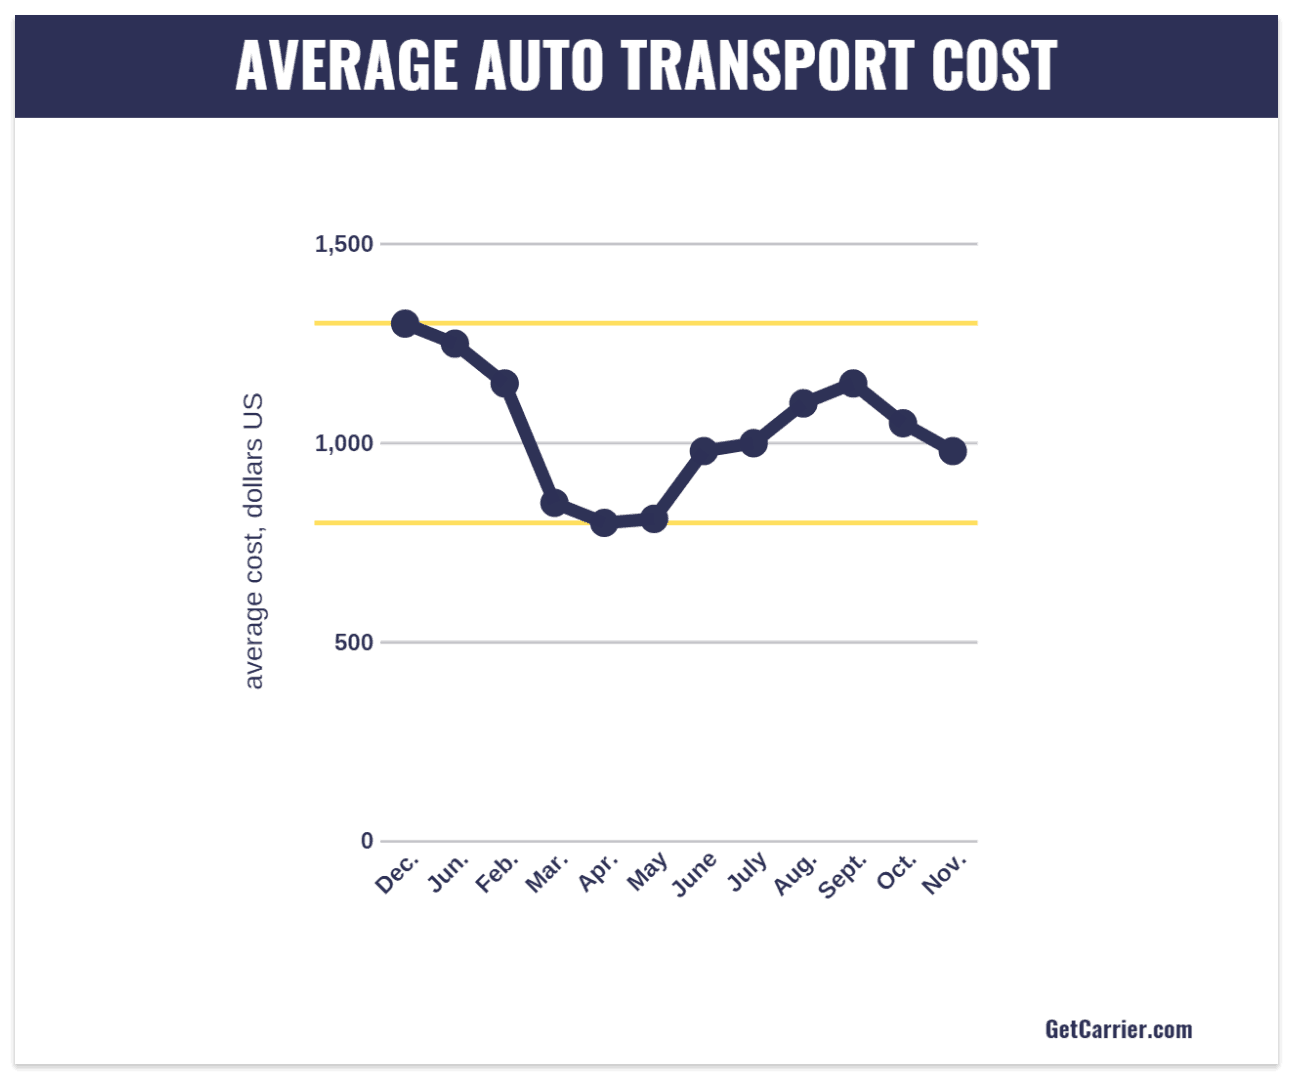 Ship Car Across Country: average auto transport cost (seasons)